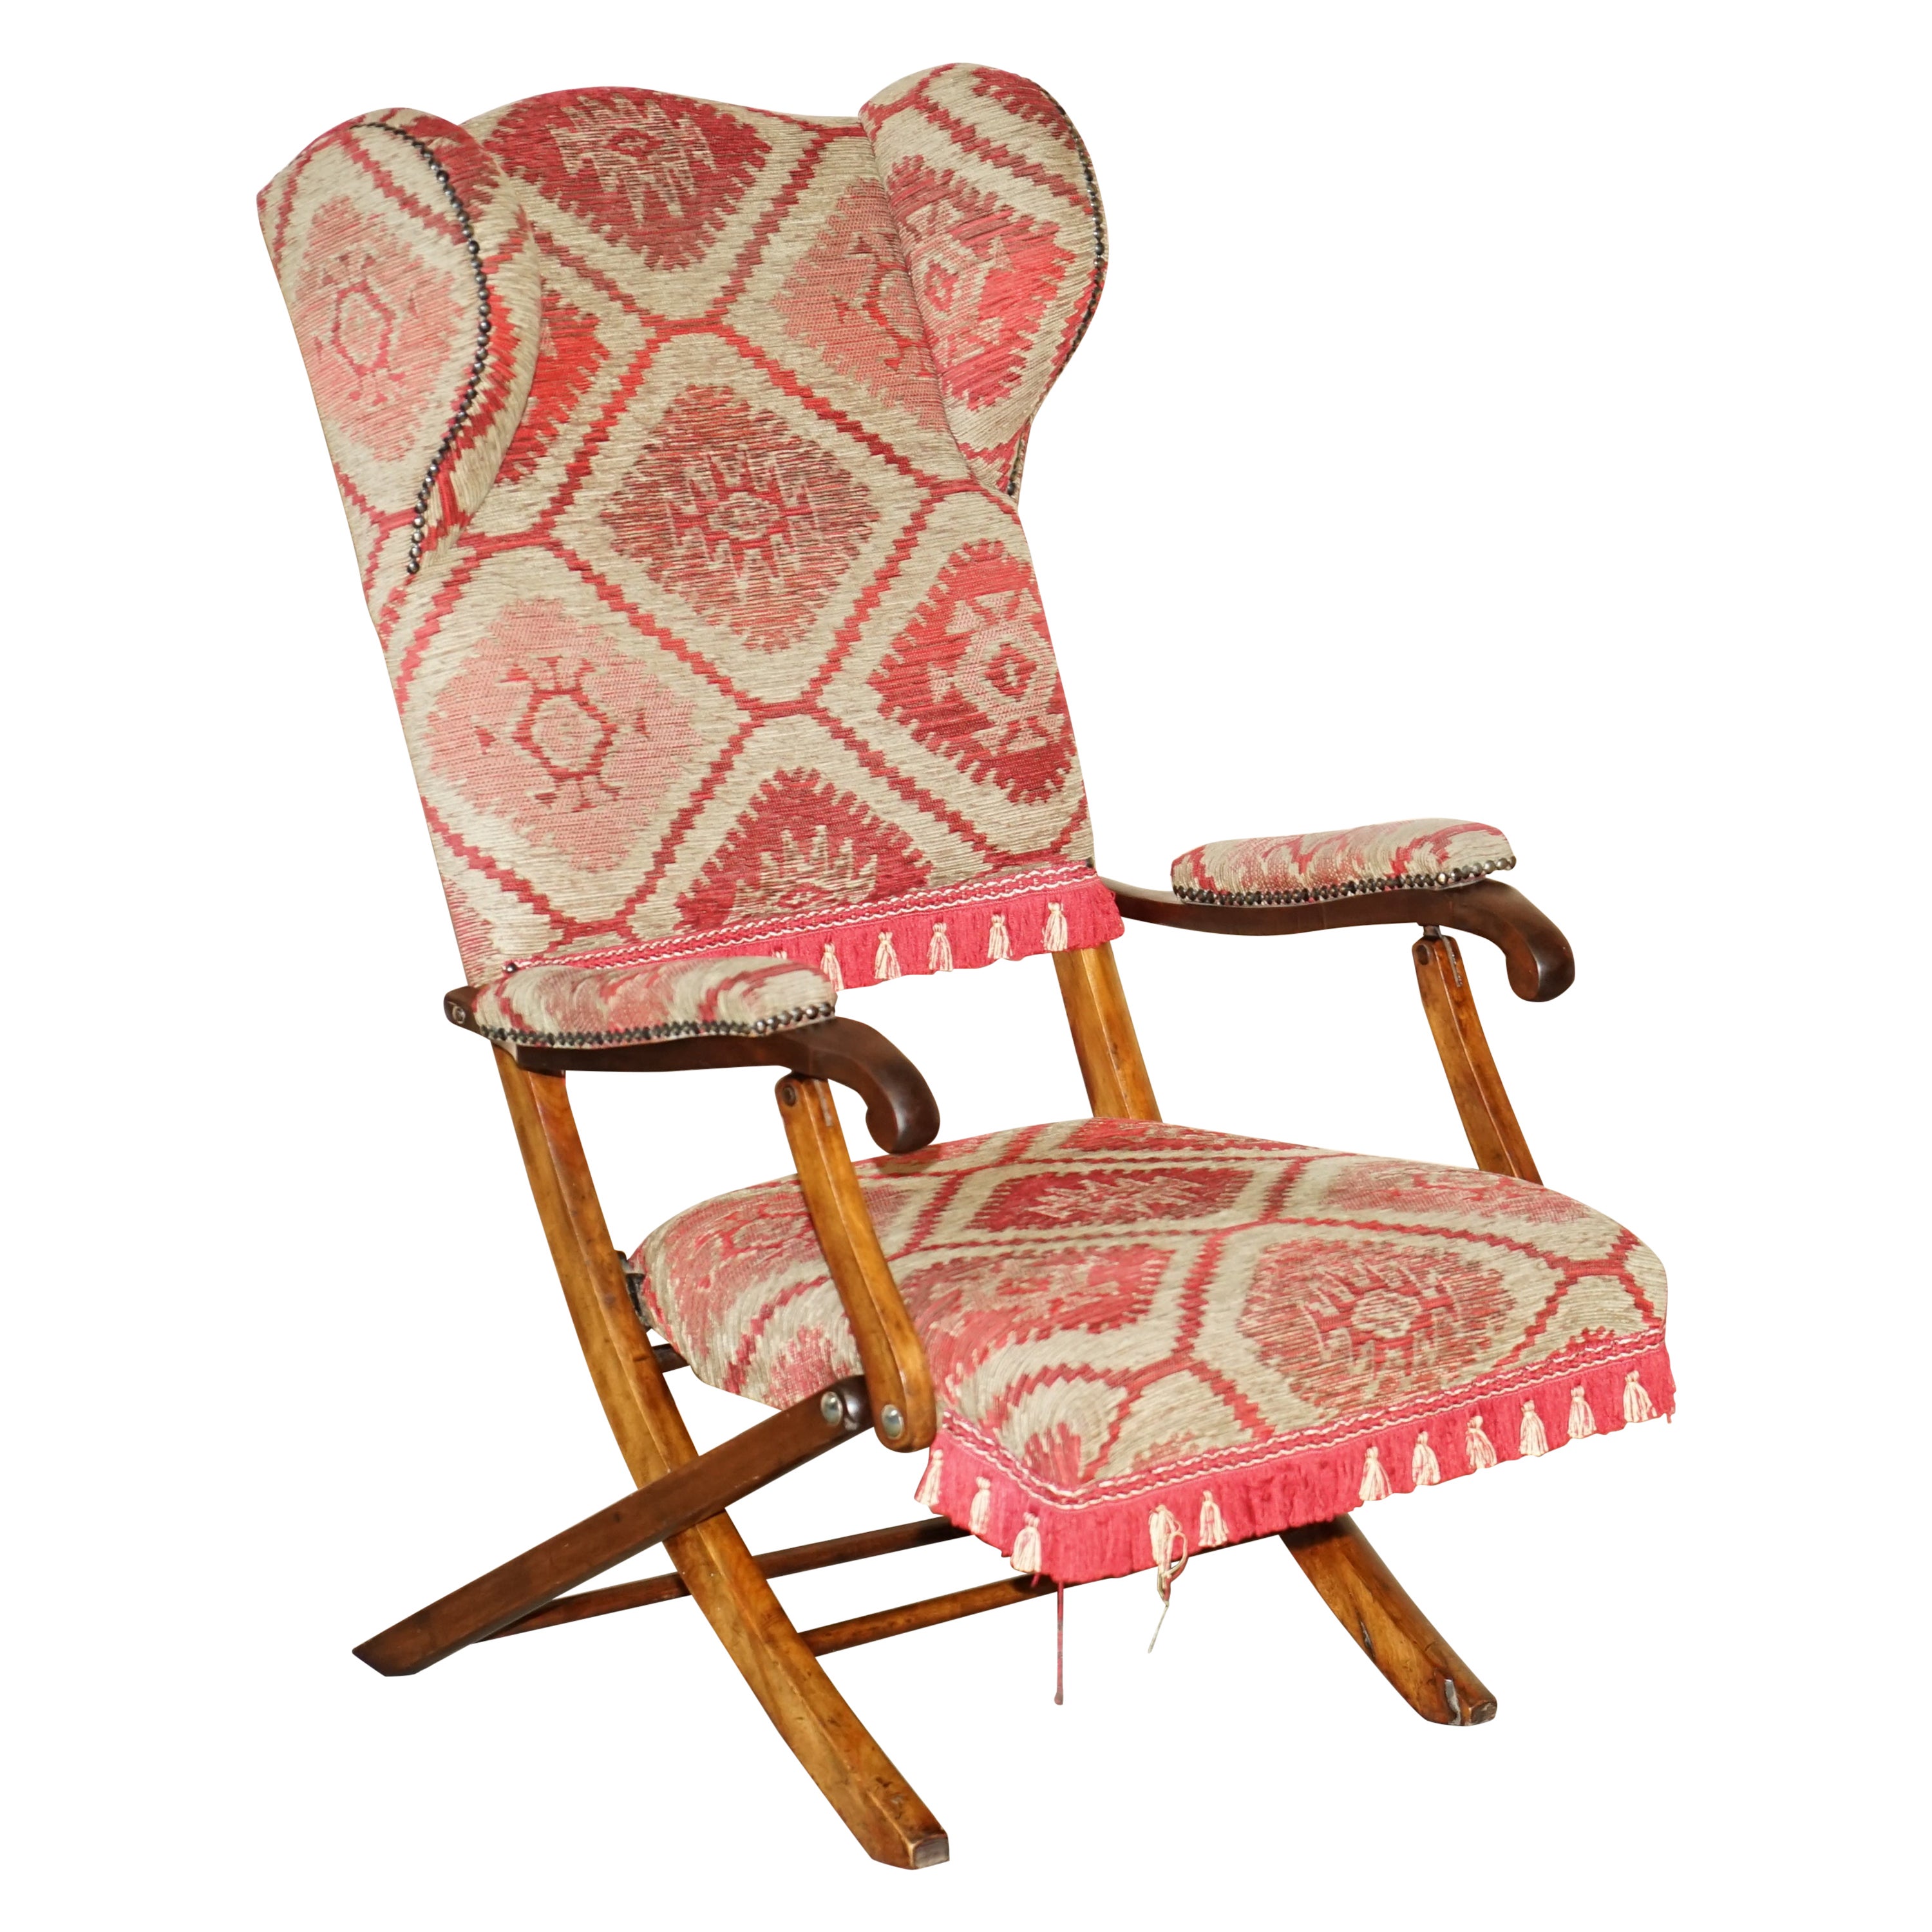 Stunning Antique Victorian Military Campaign Kilim Upholstered Folding Armchair